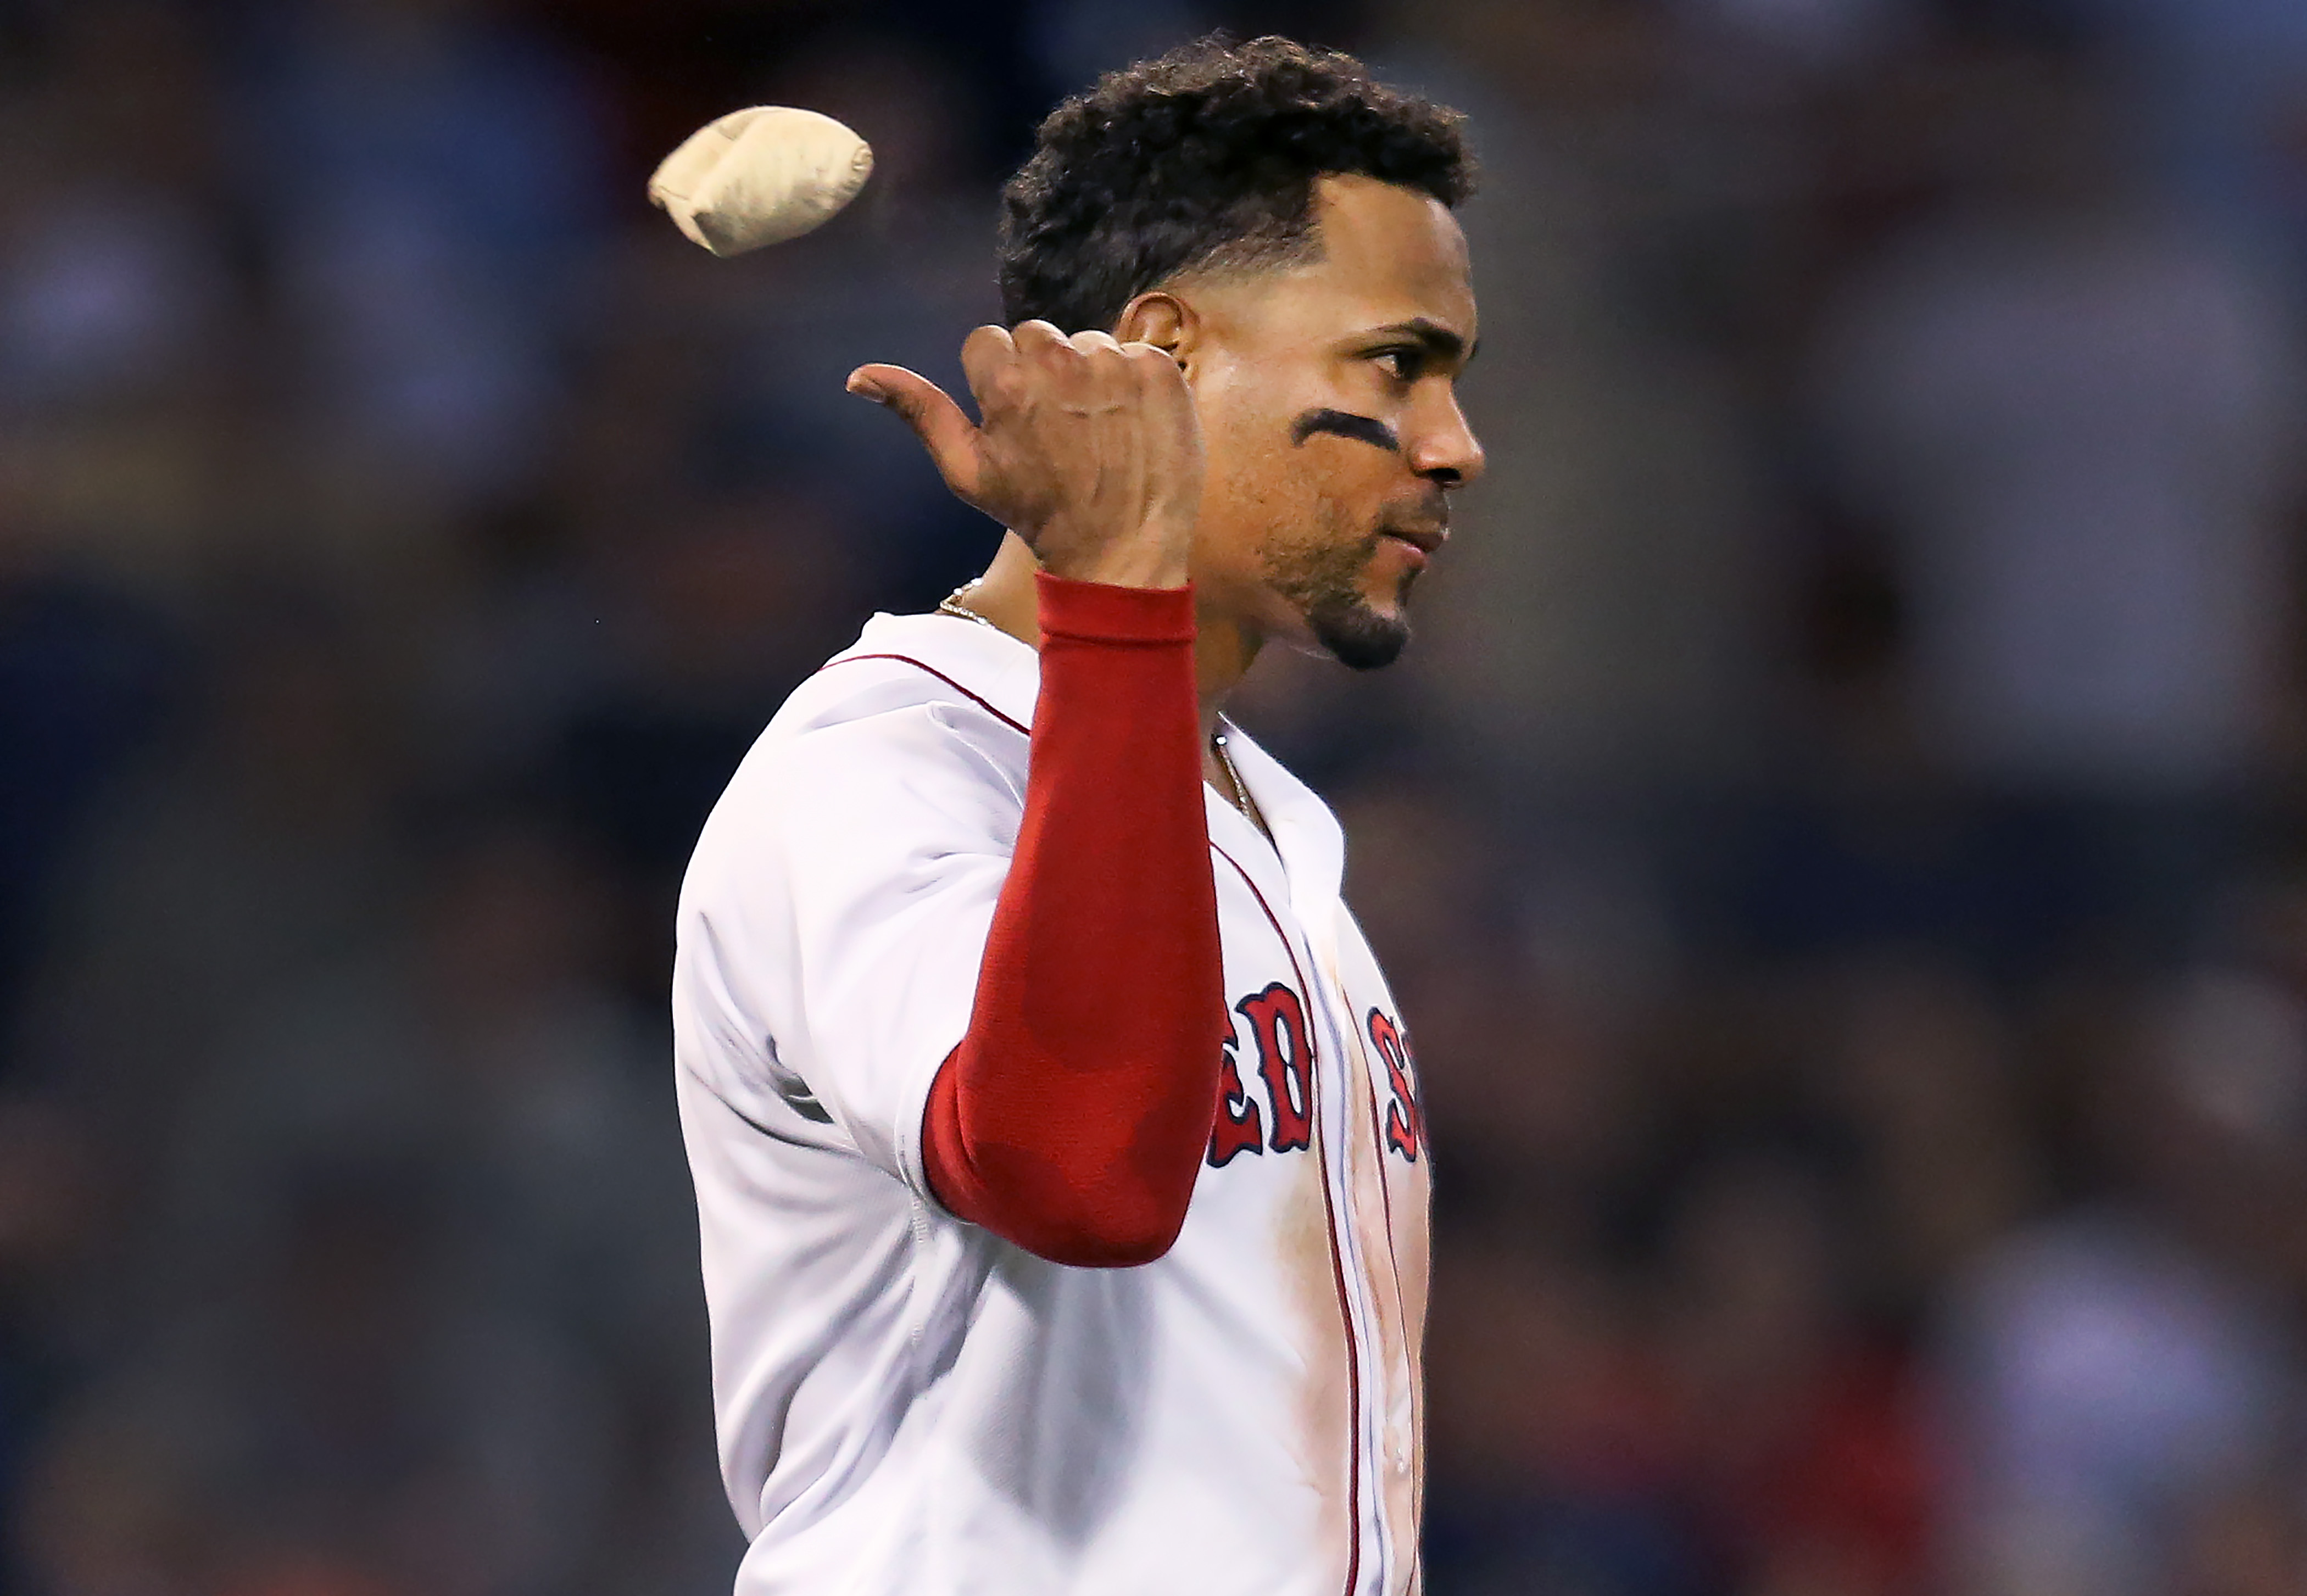 BSJ Live Coverage: Red Sox at Yankees, 7:05 p.m. - Bryan Bello and Boston  seek restart after bad losses